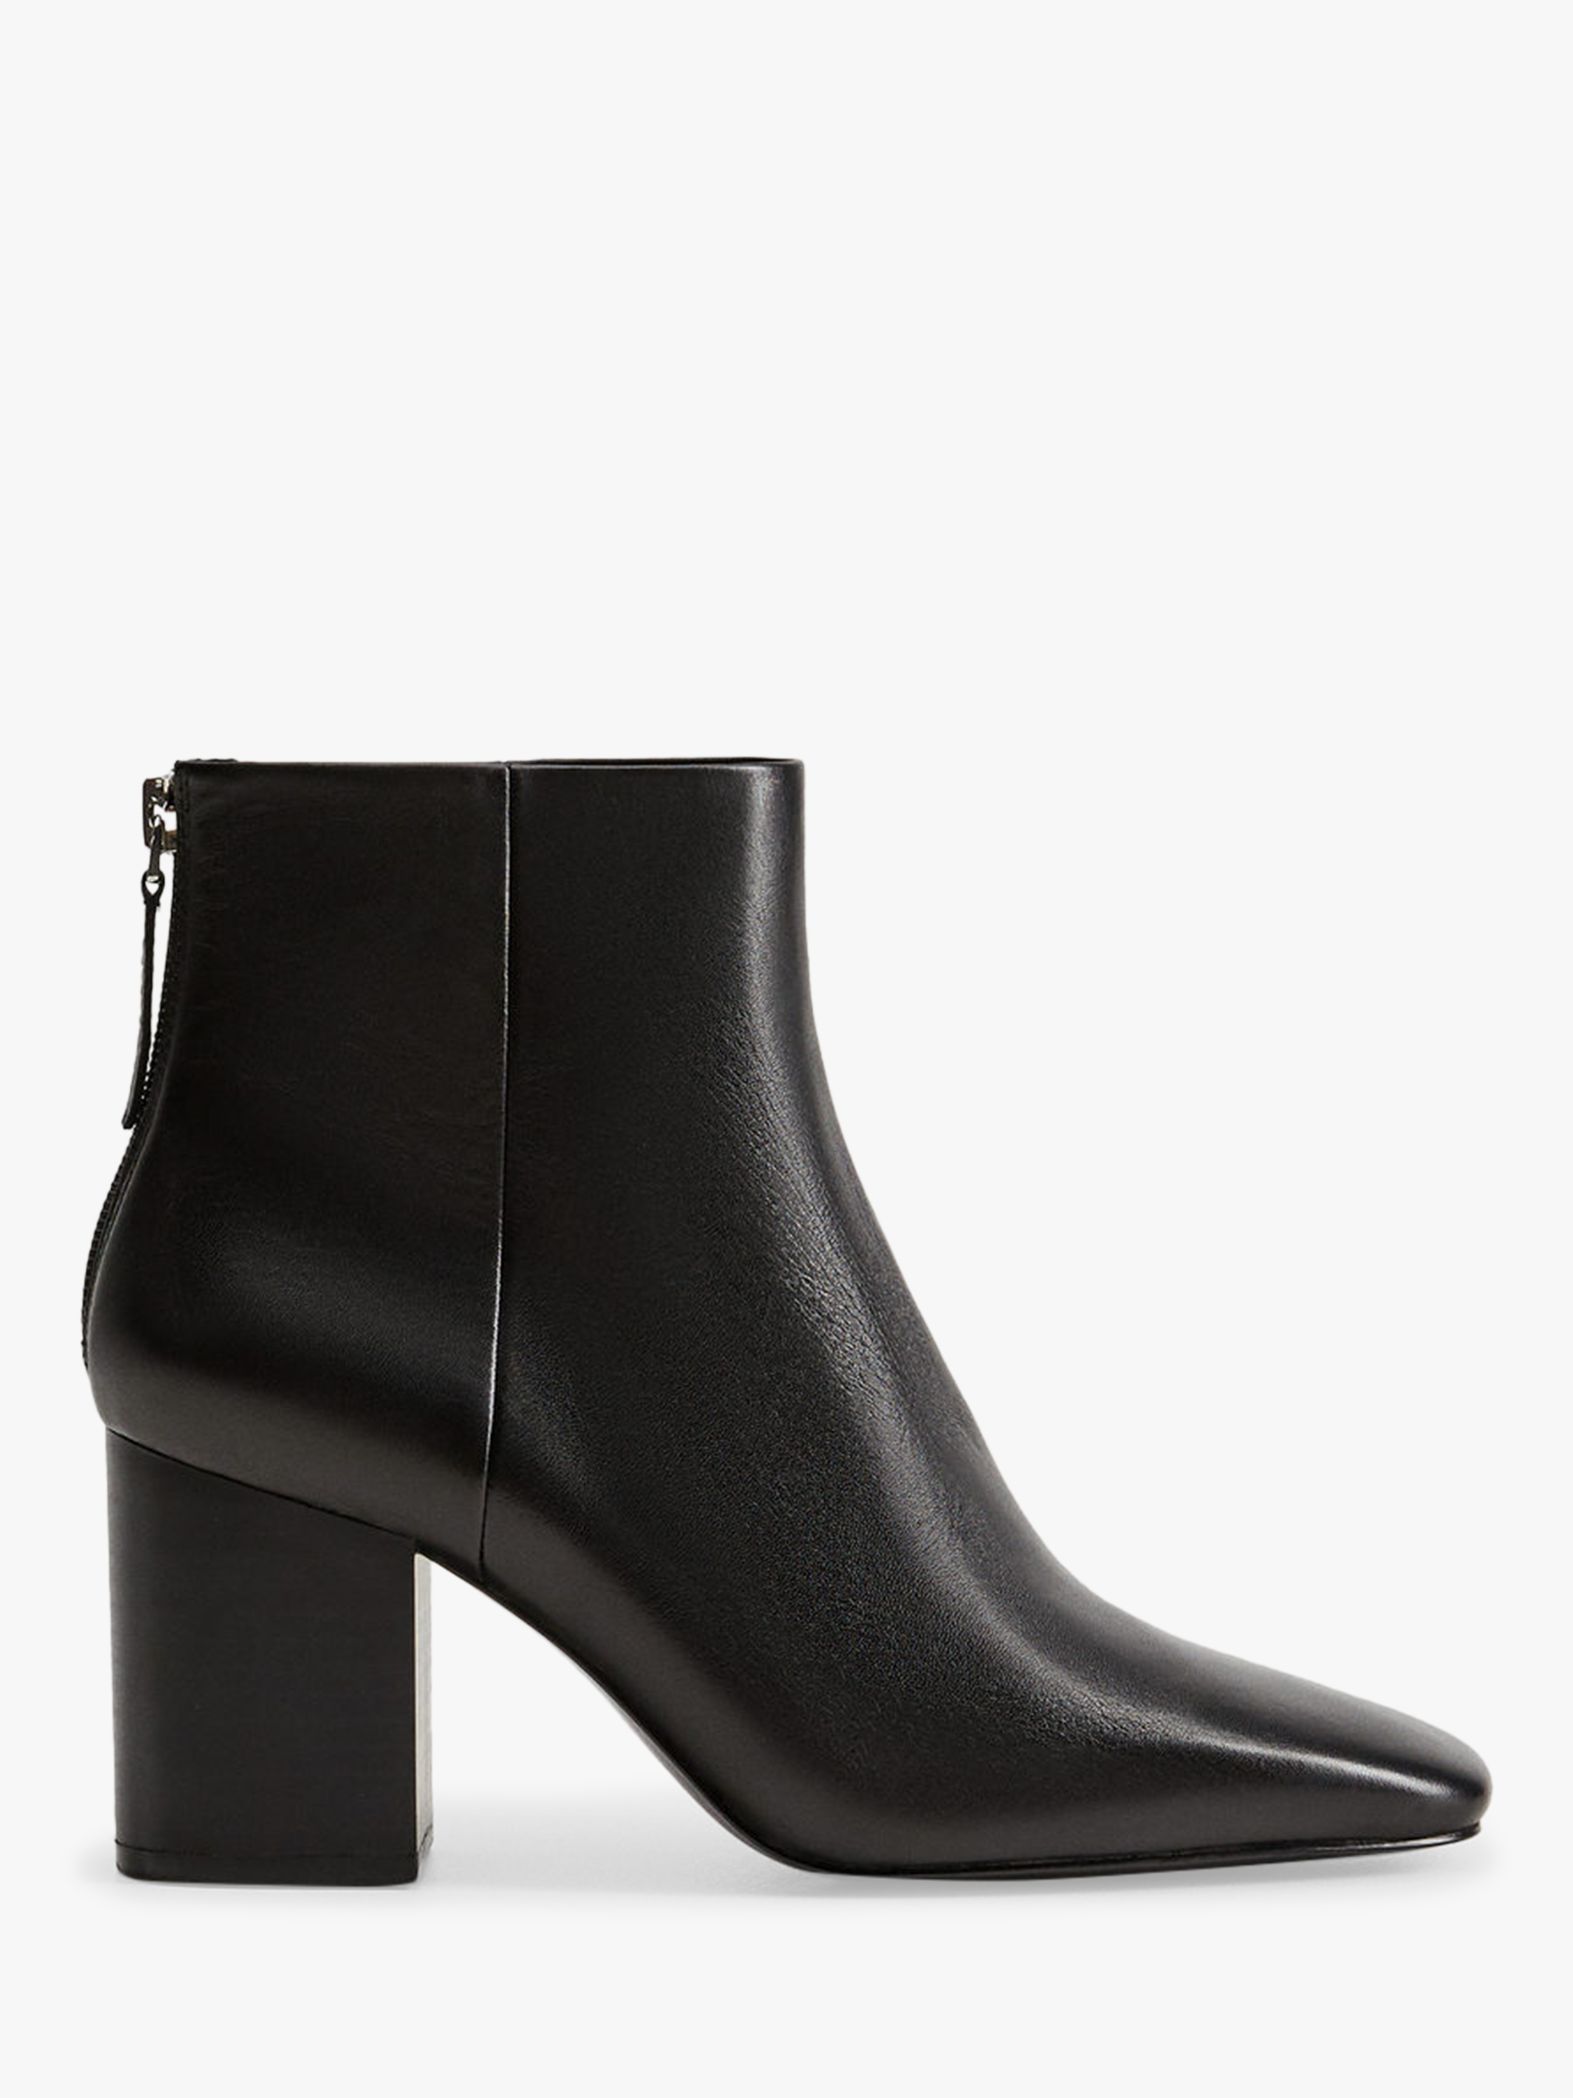 Mango Leather Square Toe Ankle Boots, Black at John Lewis & Partners